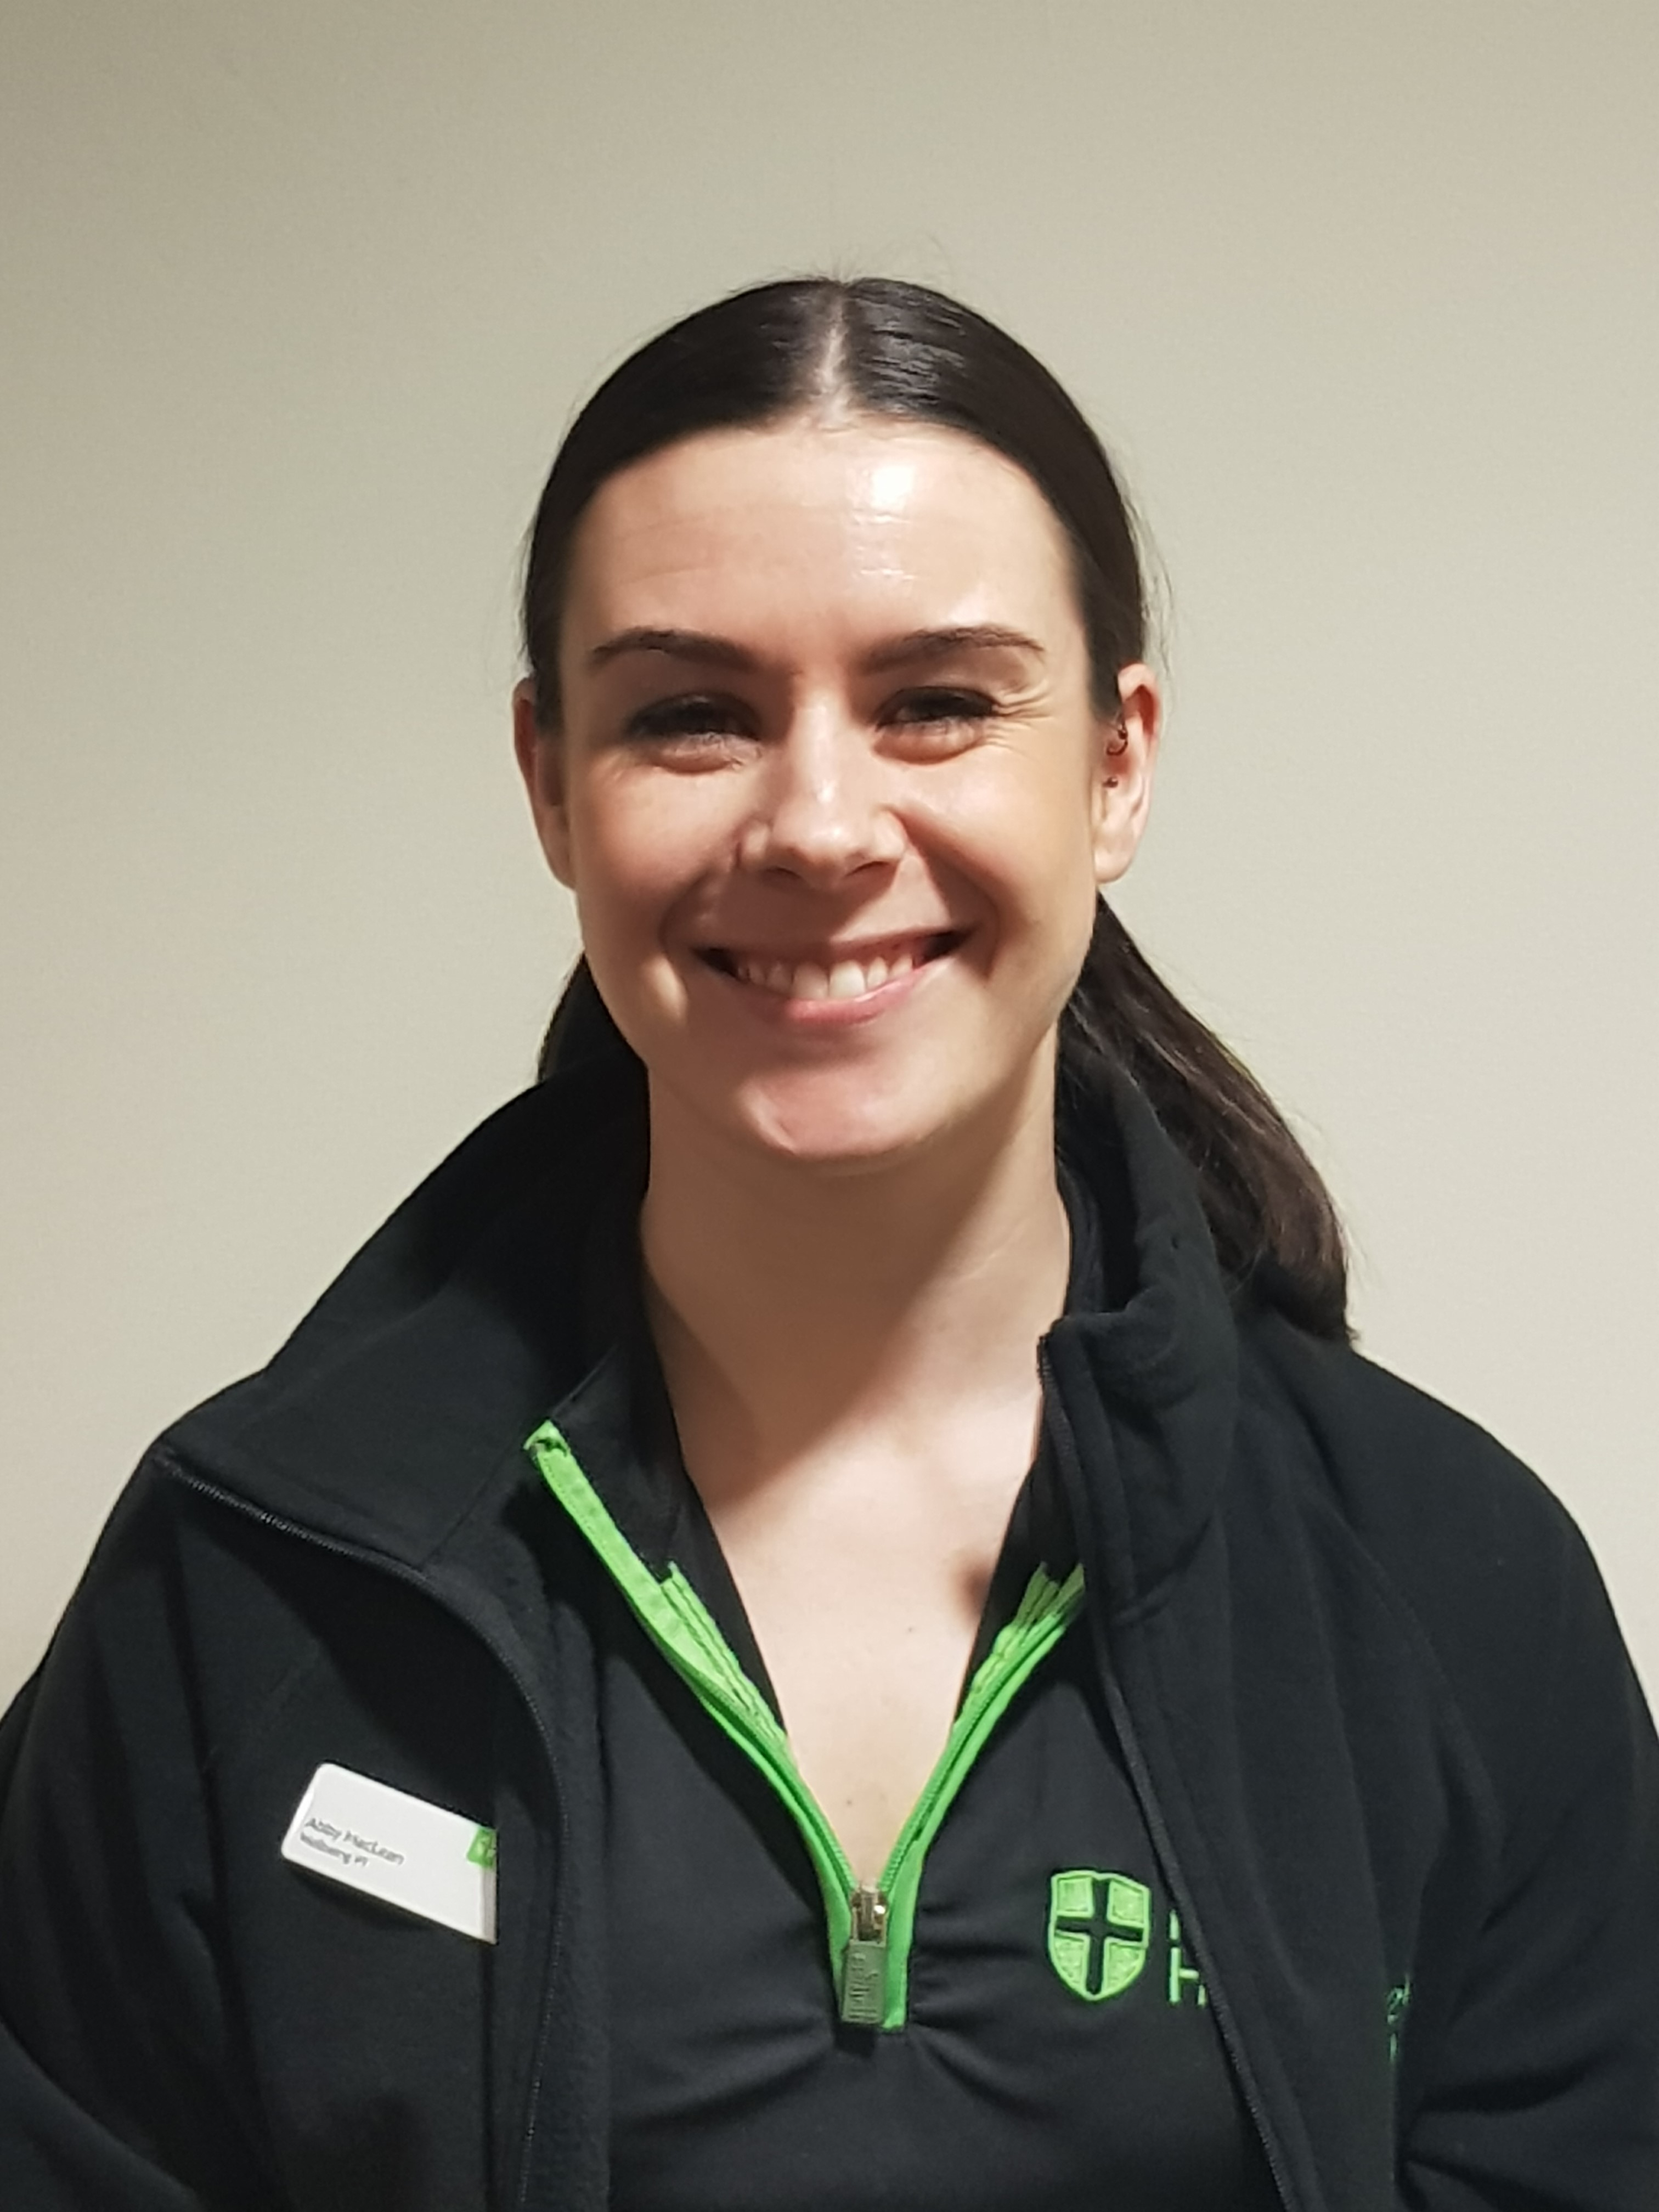 Abby O’Rourke, clinical fitness regional lead at Nuffield Health